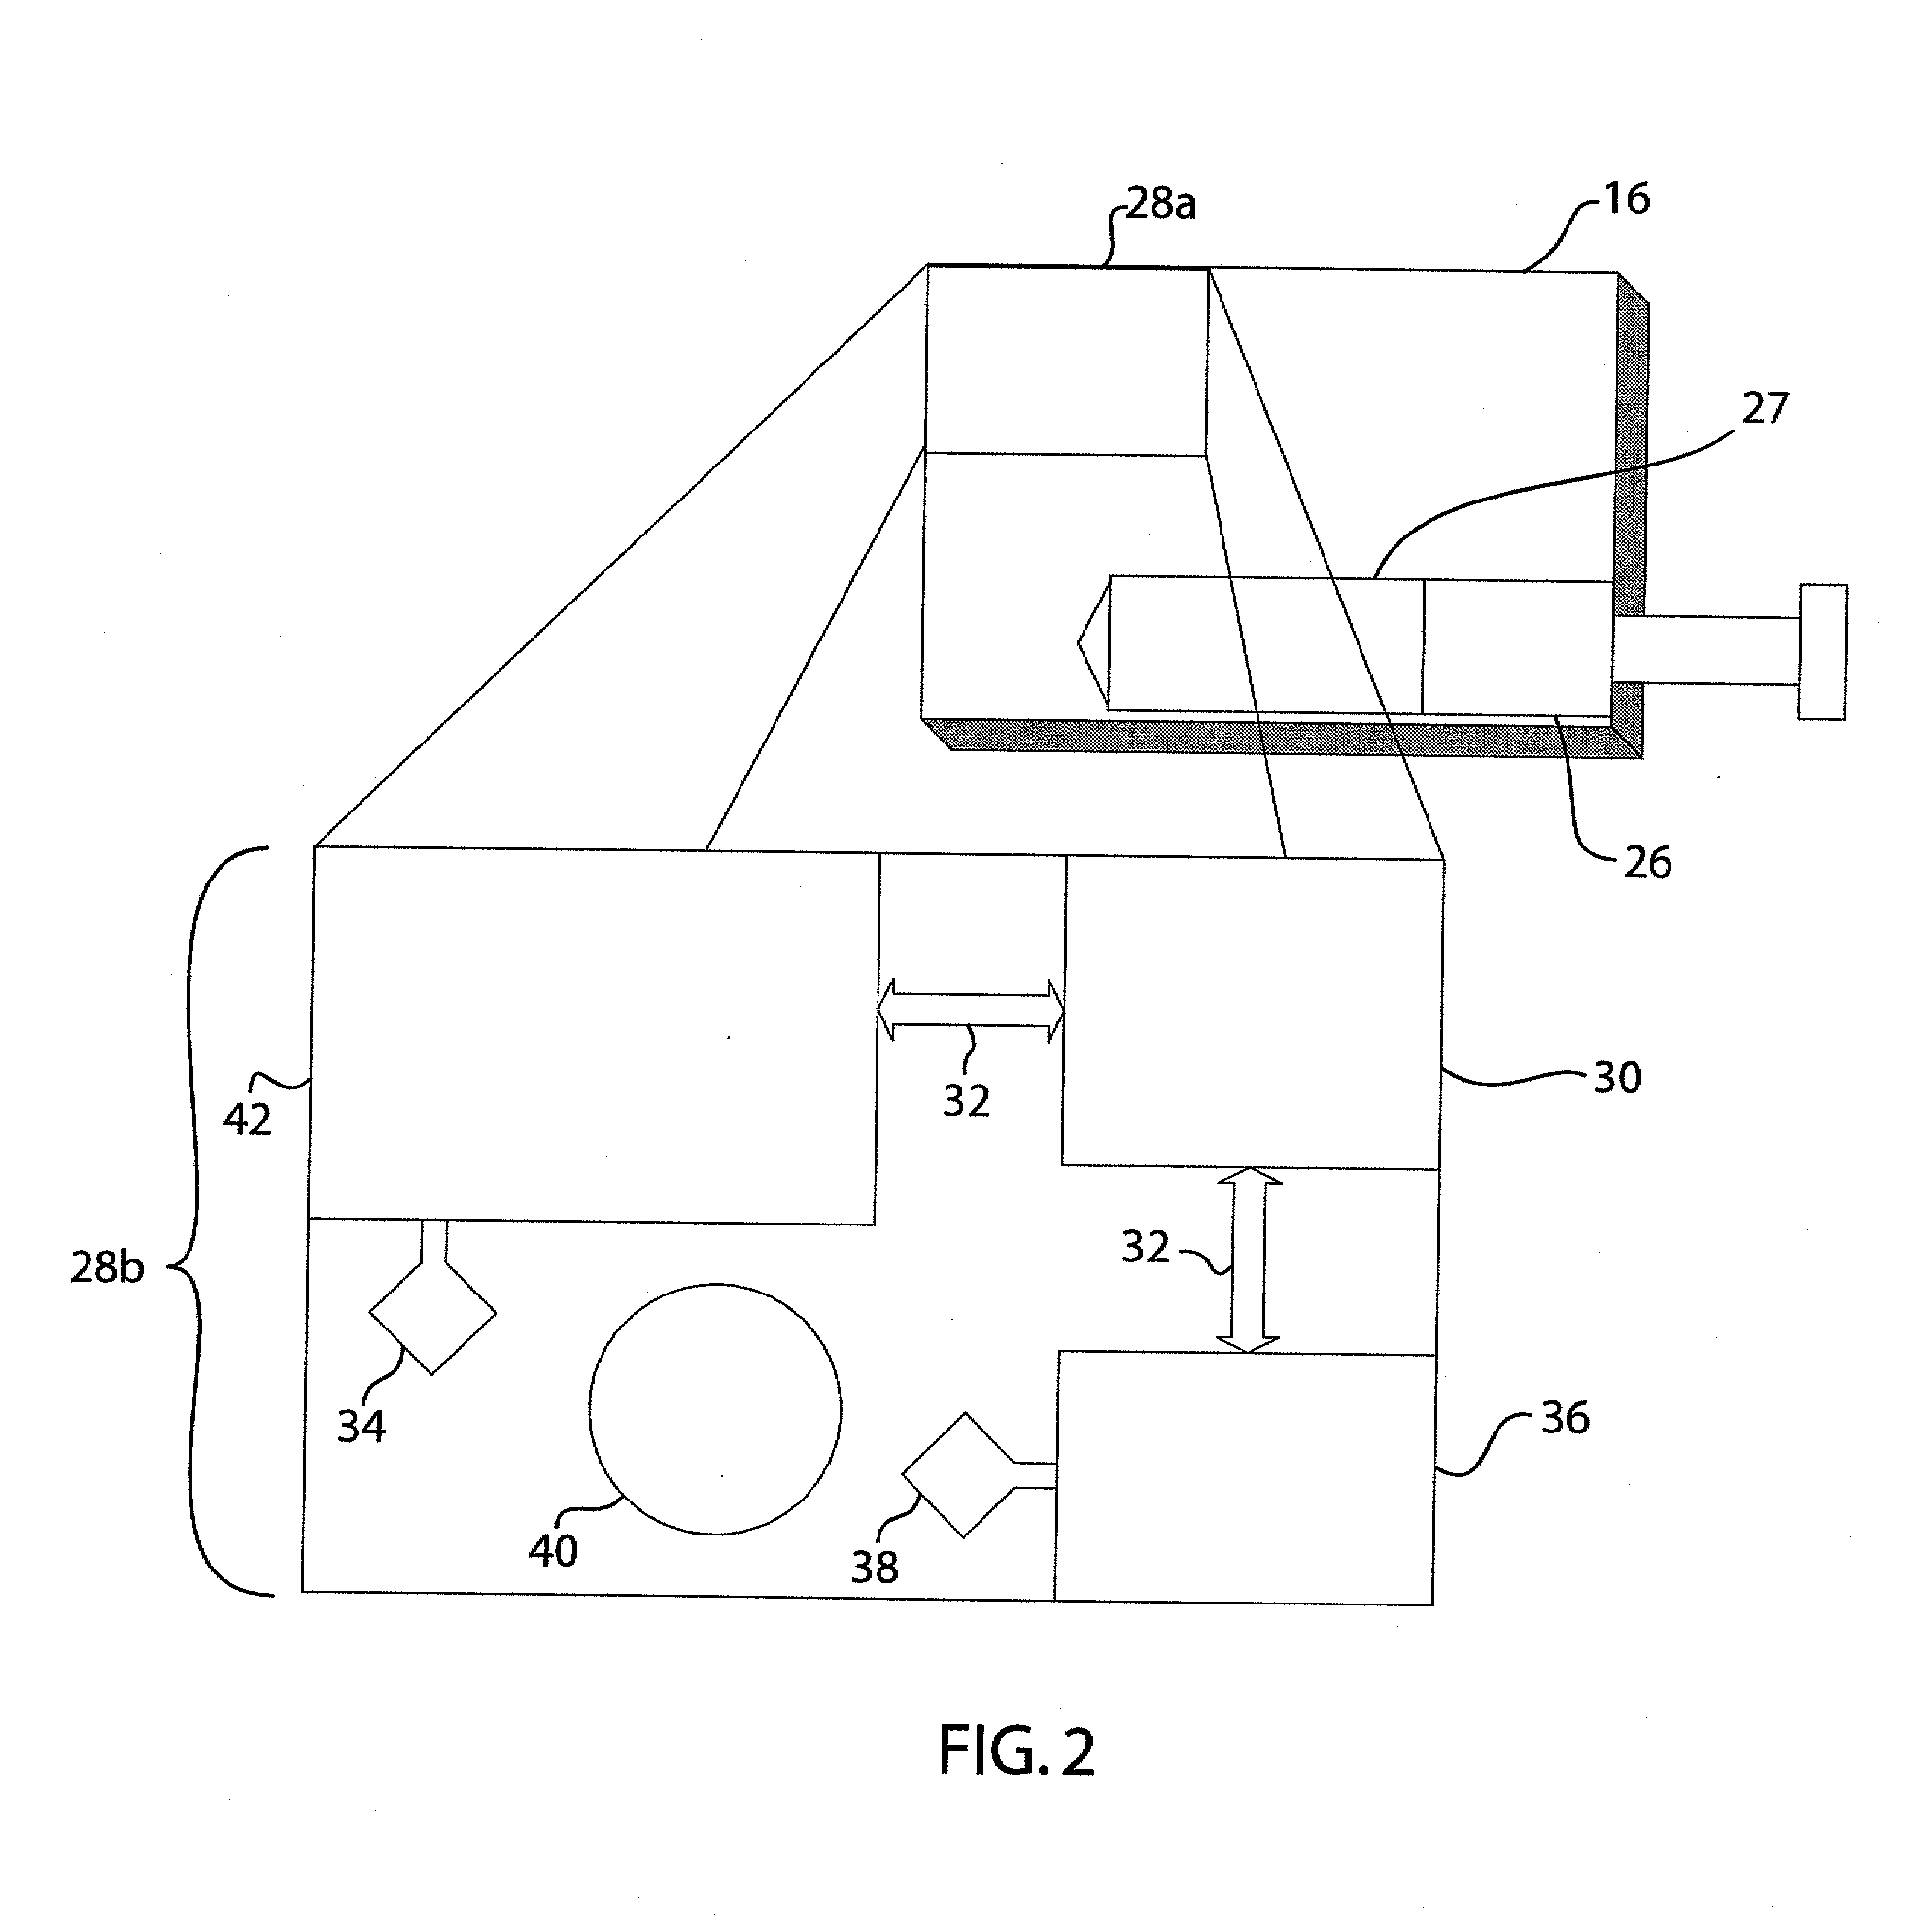 System and Method of Drug Identification Through Radio Frequency Identification (RFID)